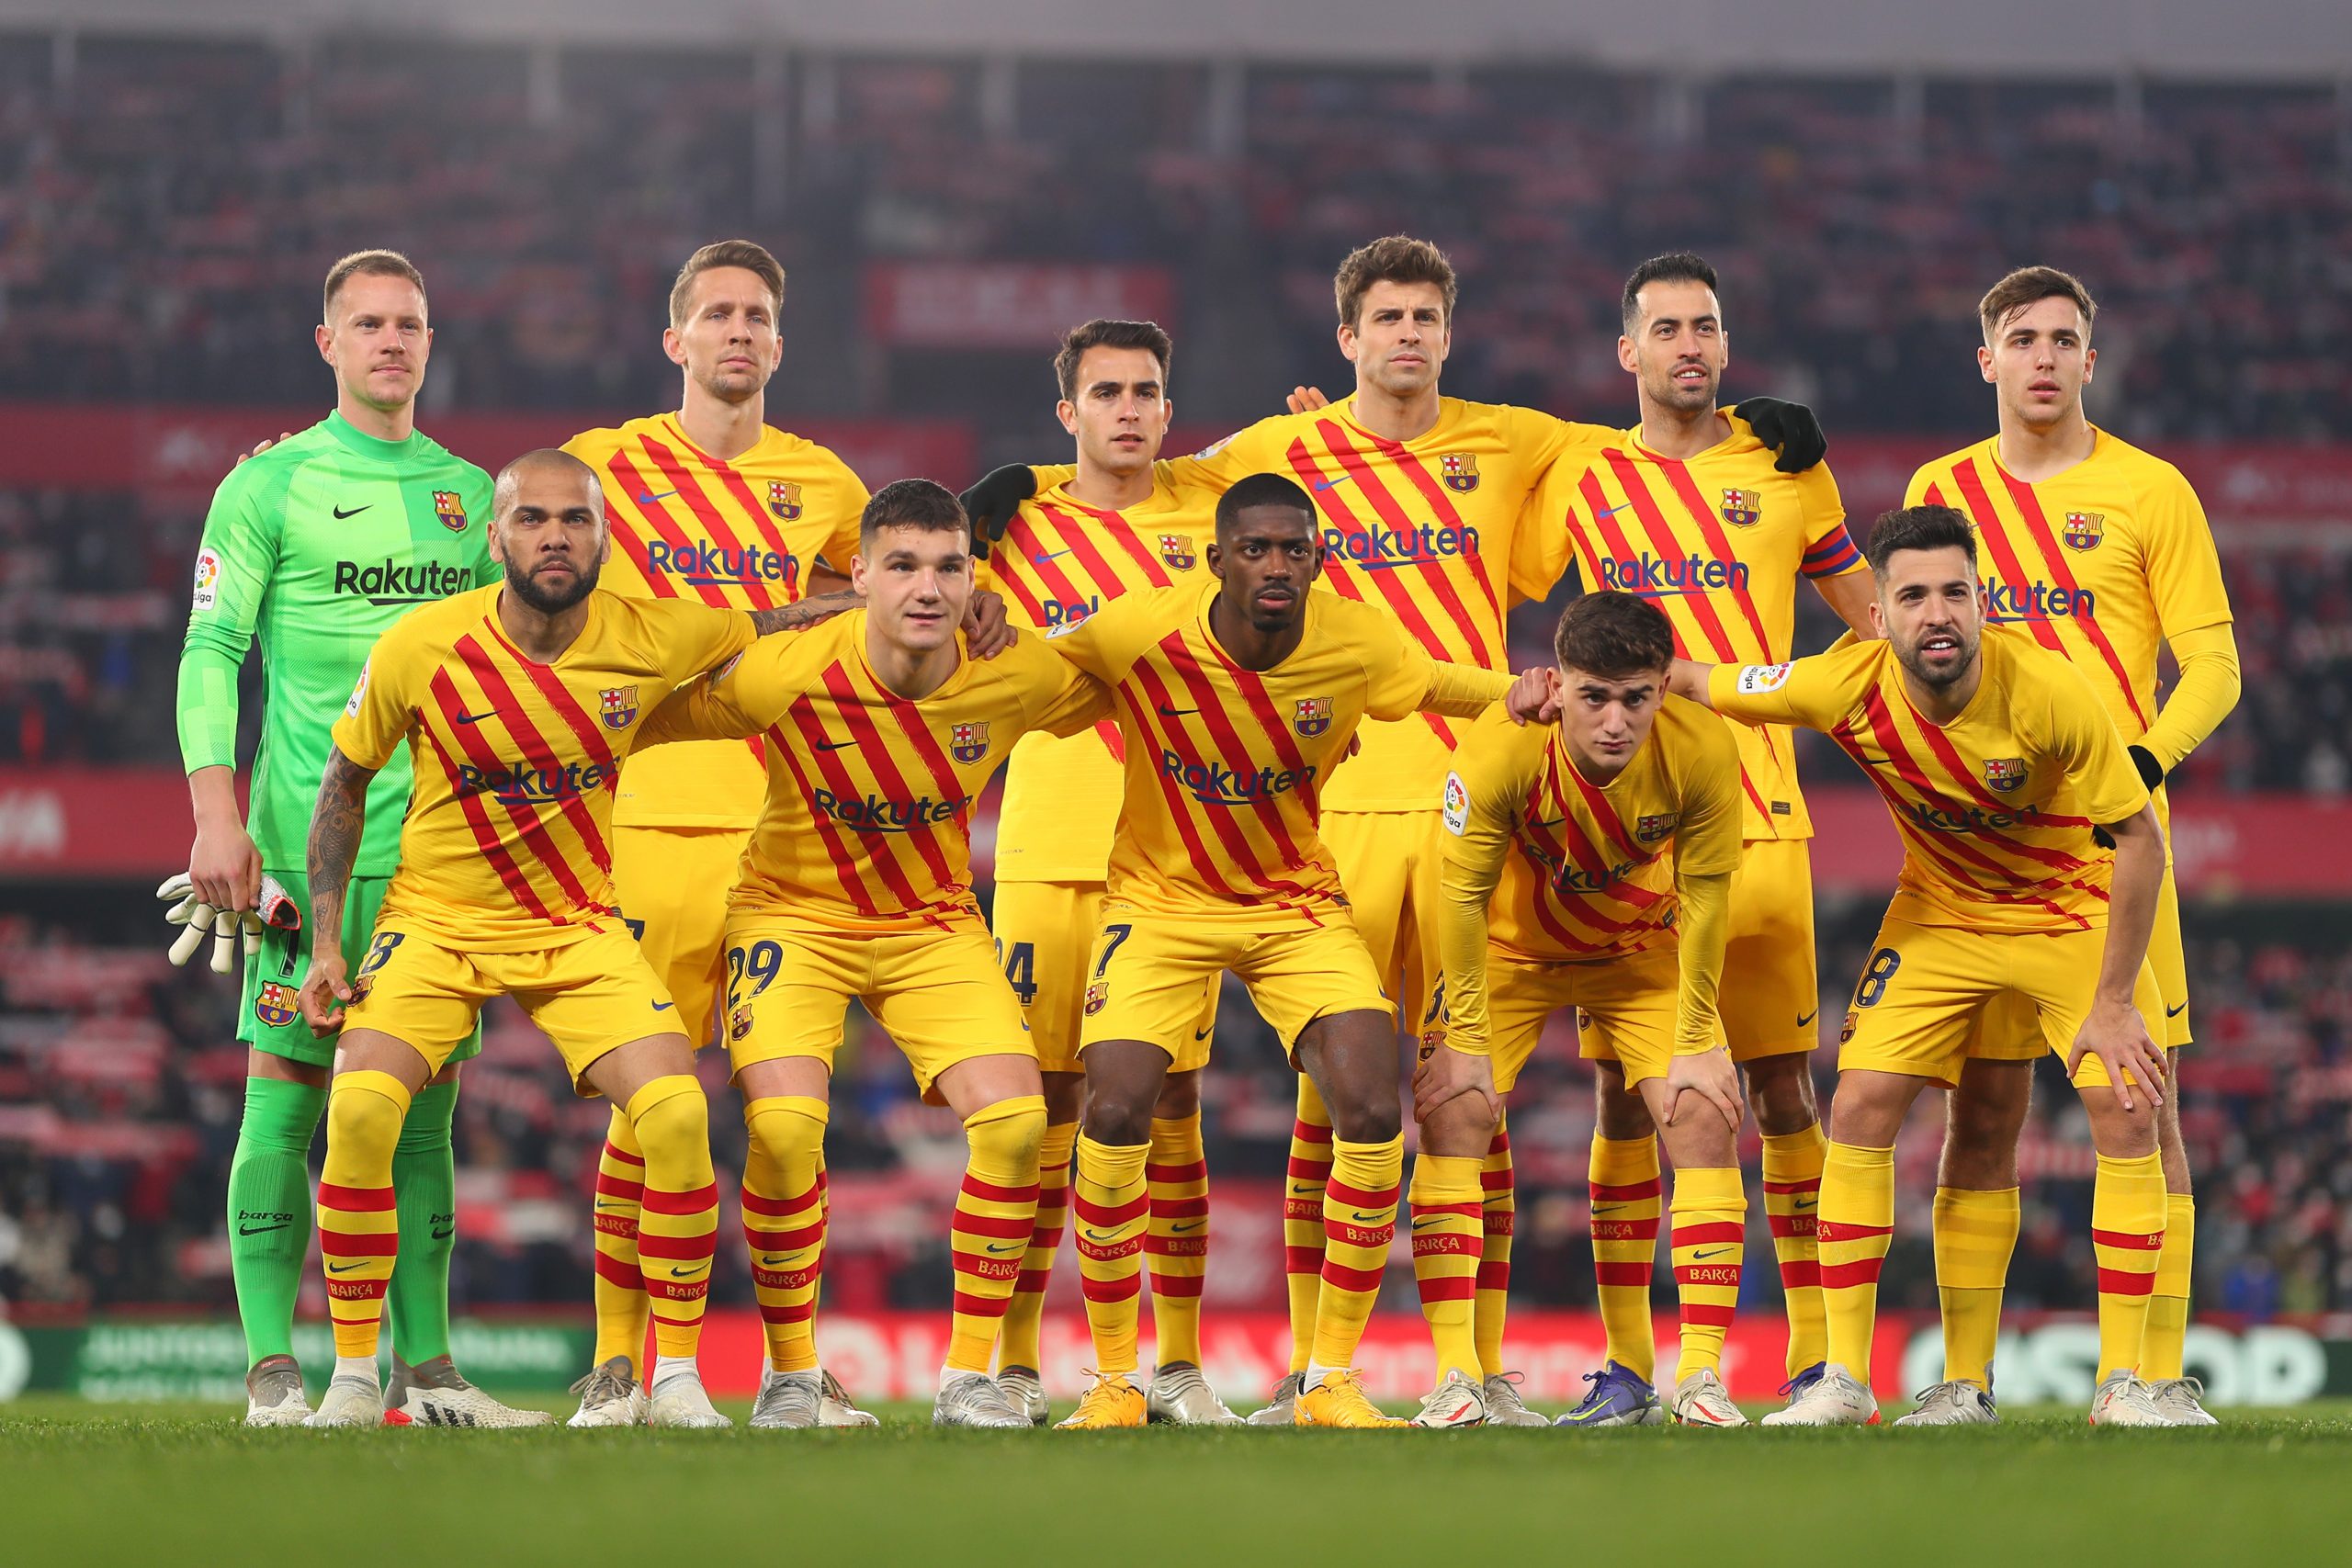 GRANADA, SPAIN - JANUARY 08: FC Barcelona players line up for a photo prior to the La Liga Santader match between Granada CF and FC Barcelona at the Nuevo Estadio de Los Cármenes in Granada, Spain (Photo by Fran Santiago/Getty Images)The 4th Official uses images provided by the following image agency: Getty Images (https://www.gettyimages.de/) Imago Images (https://www.imago-images.de/)